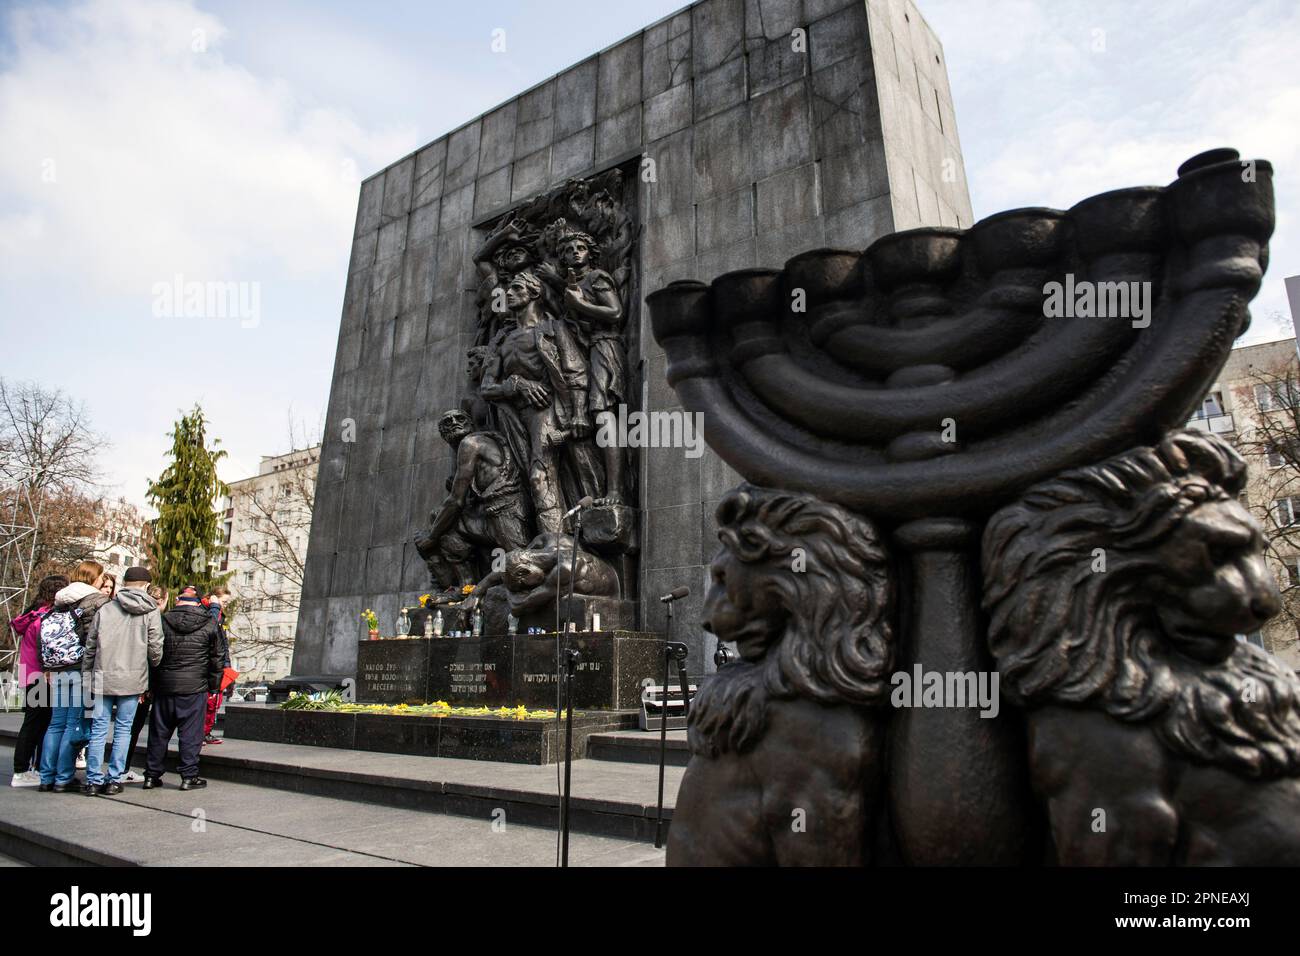 Warsaw, Mazowieckie, Poland. 18th Apr, 2023. The Monument to the Ghetto Heroes commemorates Jewish insurgents from the Warsaw Ghetto, which lasted from 19 April 1943 to 16 May 1943. This year April 19, the world will mark the 80th anniversary of the Warsaw Ghetto Uprising ''“ the first large-scale metropolitan uprising in Nazi-occupied Europe. The Uprising became an everlasting symbol of the resistance of Polish Jews against the Holocaust. Between 1942 to 1943 Germans transported over 300,000 Jews from the Warsaw Ghetto to the death camp in Treblinka and other camps.A day before the official Stock Photo